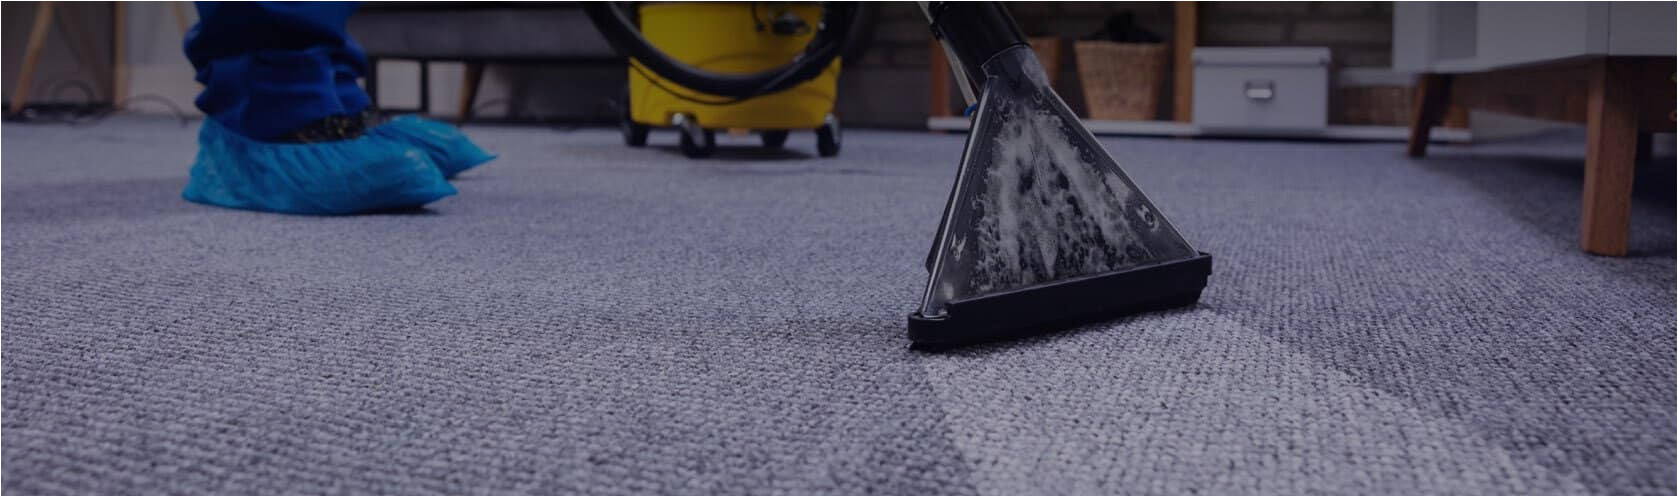 Area Rug Cleaning St Louis top 10 Best Carpet Cleaning In St Louis, Mo Angi